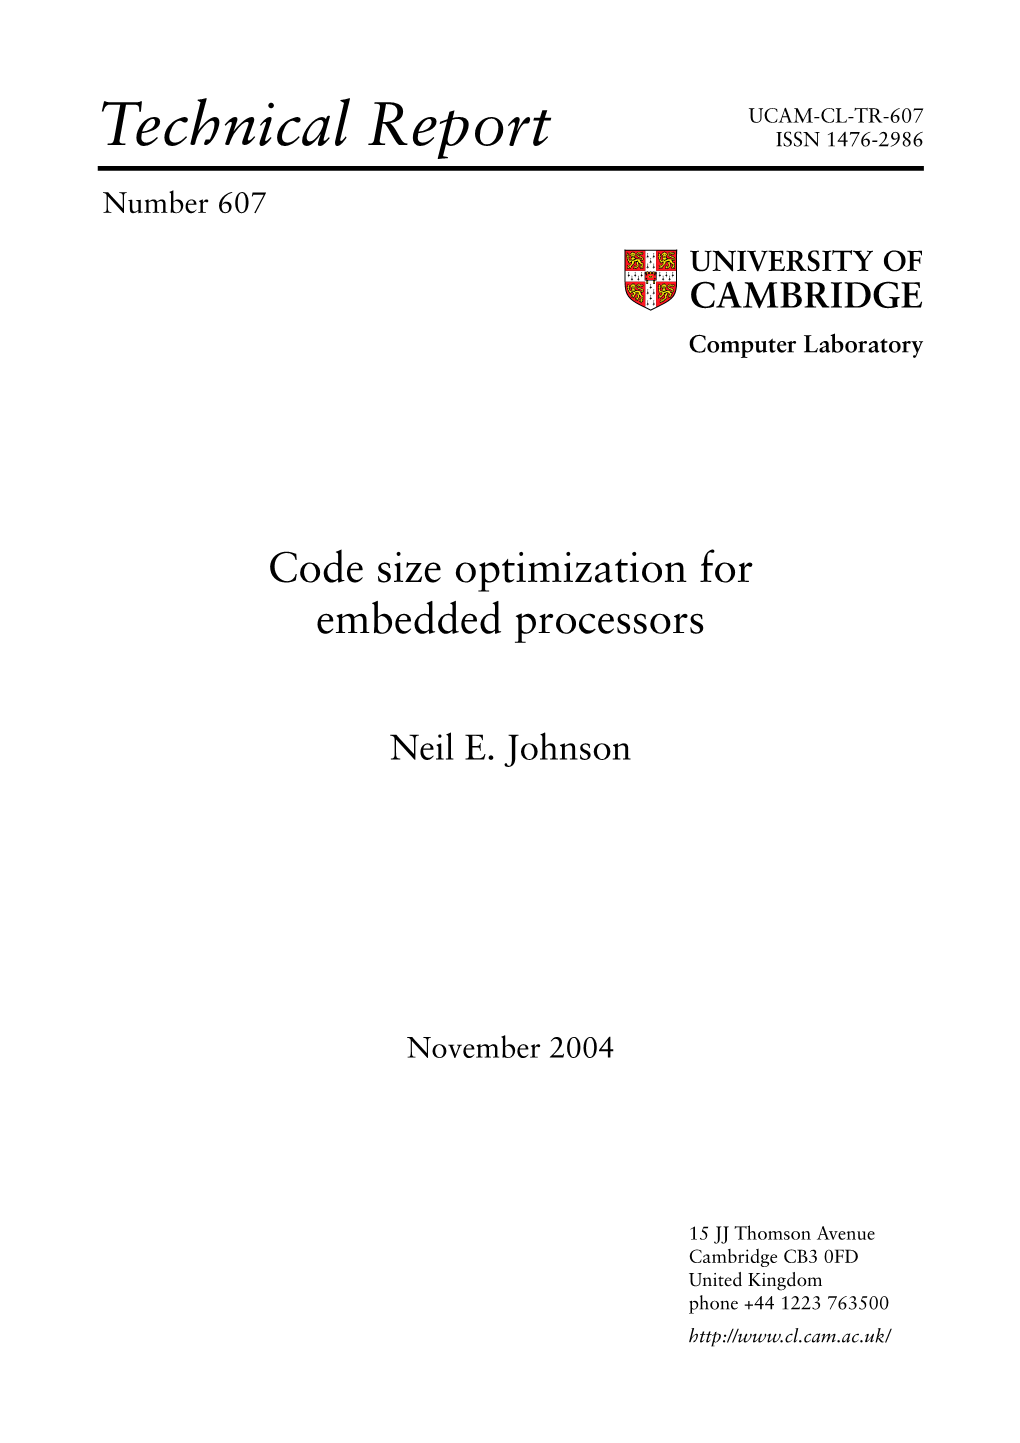 Code Size Optimization for Embedded Processors